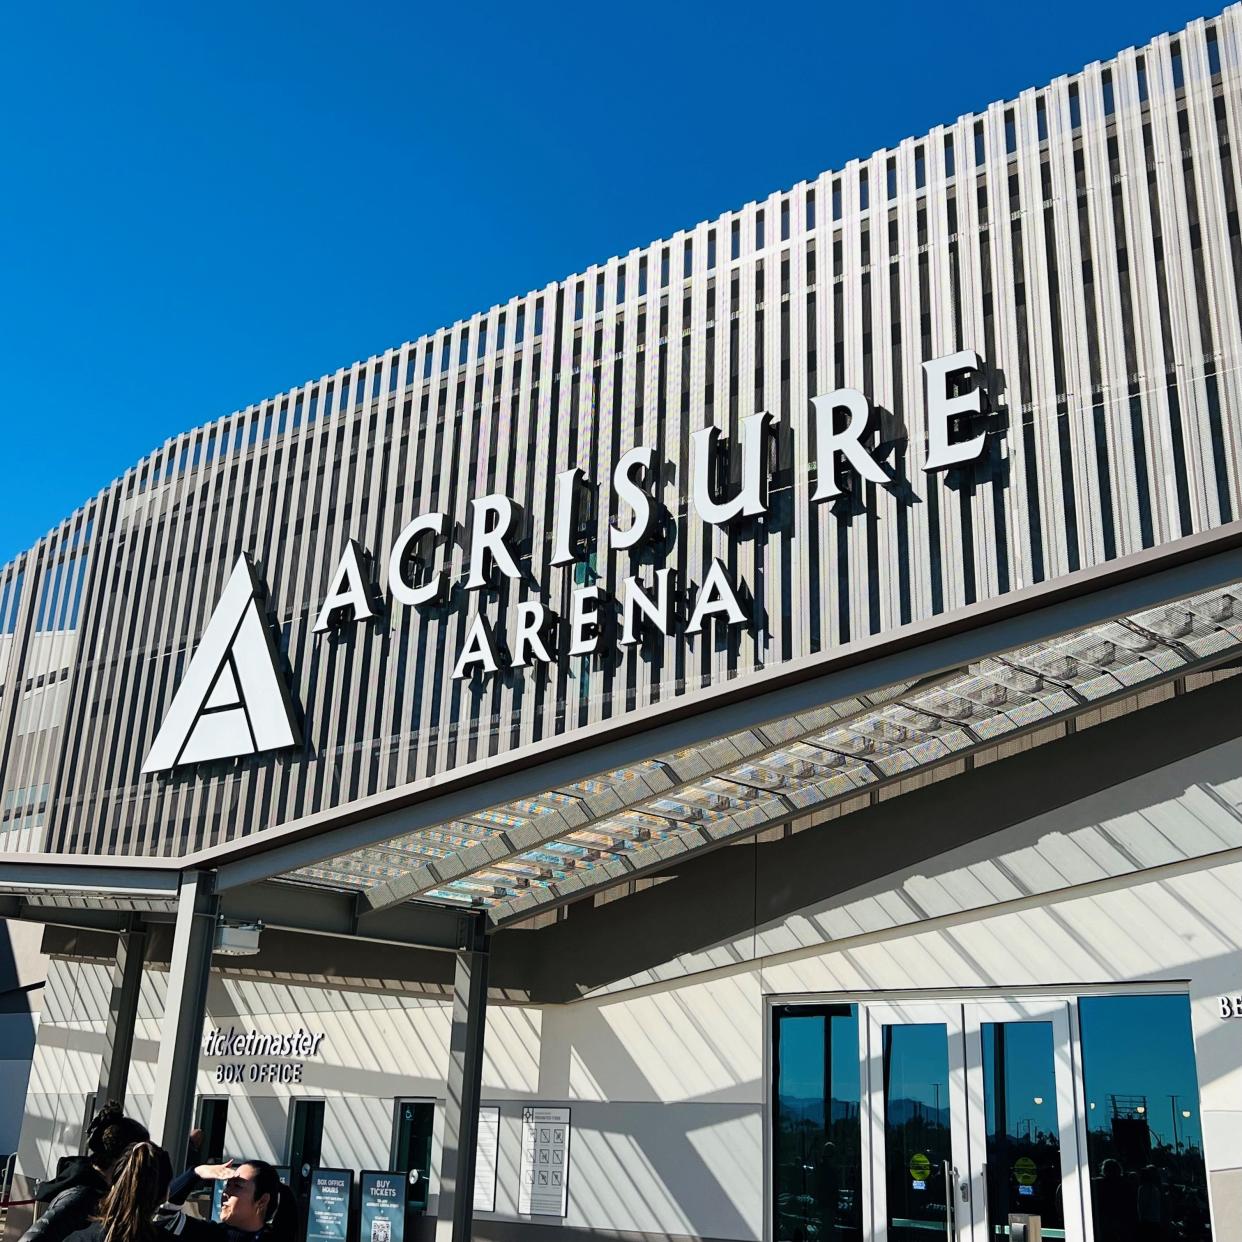 Acrisure Arena opened to the public with a Chris Rock and Dave Chappelle comedy show on Dec. 14, 2022.